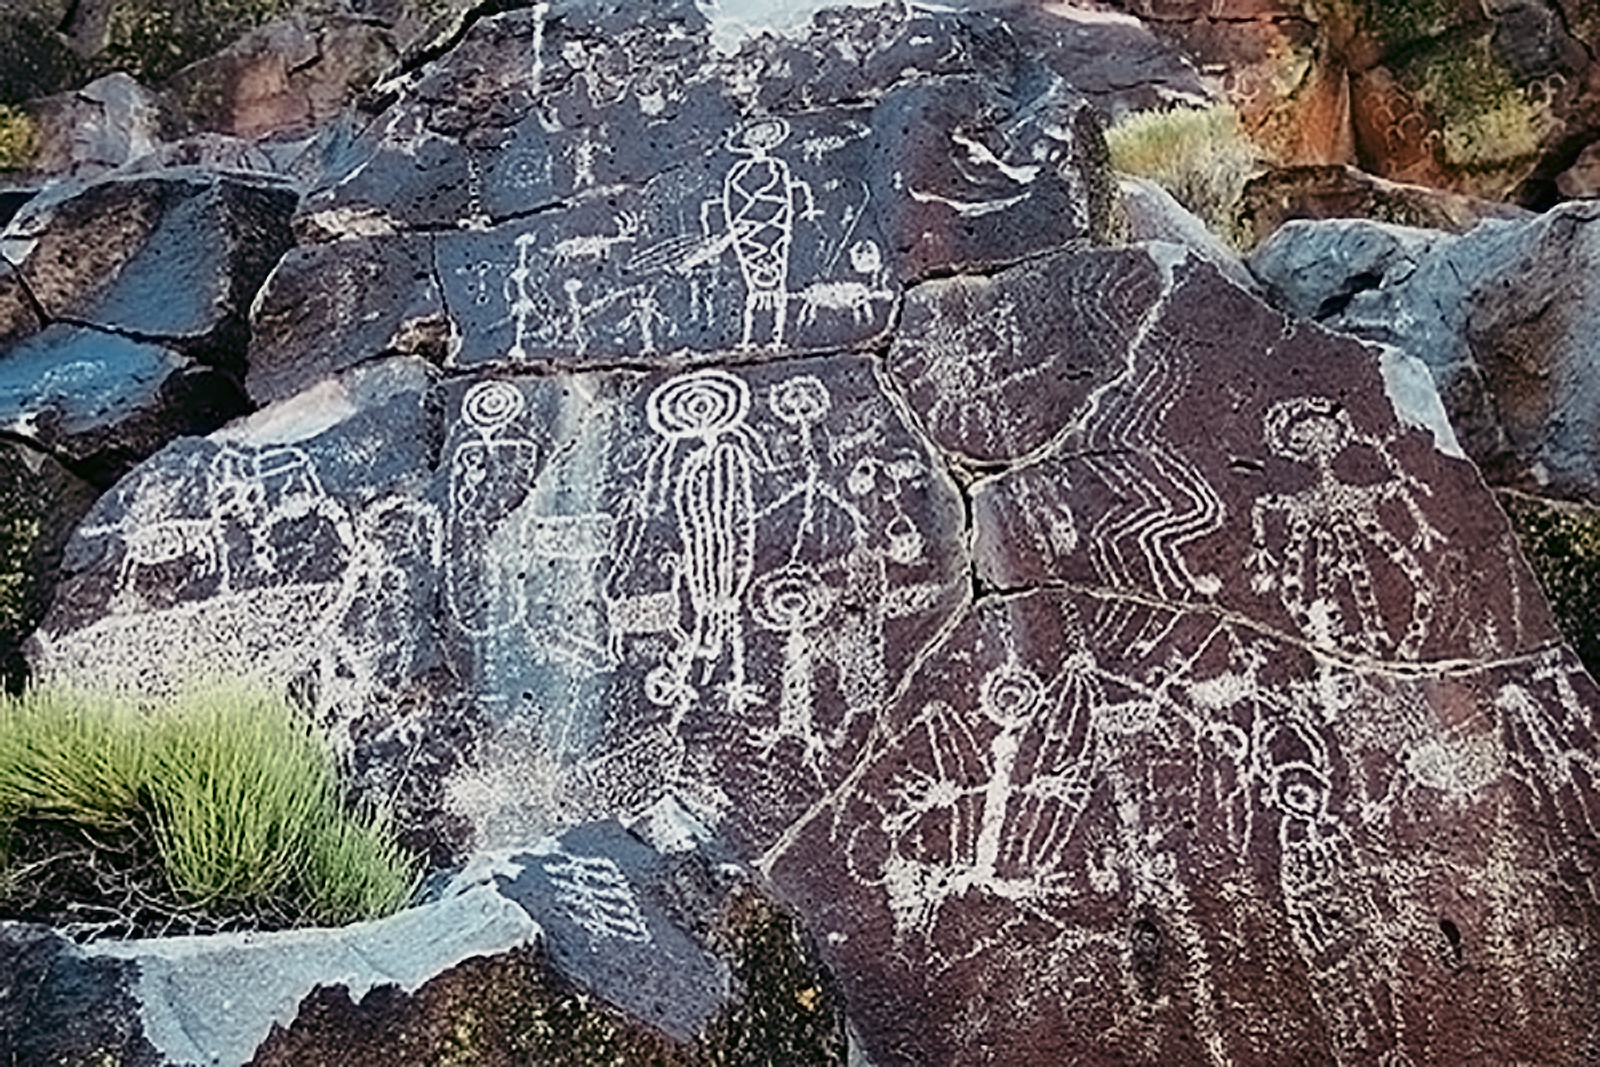 Documenting rock art is time consuming work. Depending on your criteria for counting, this panel has at least 70 individual petroglyph elements